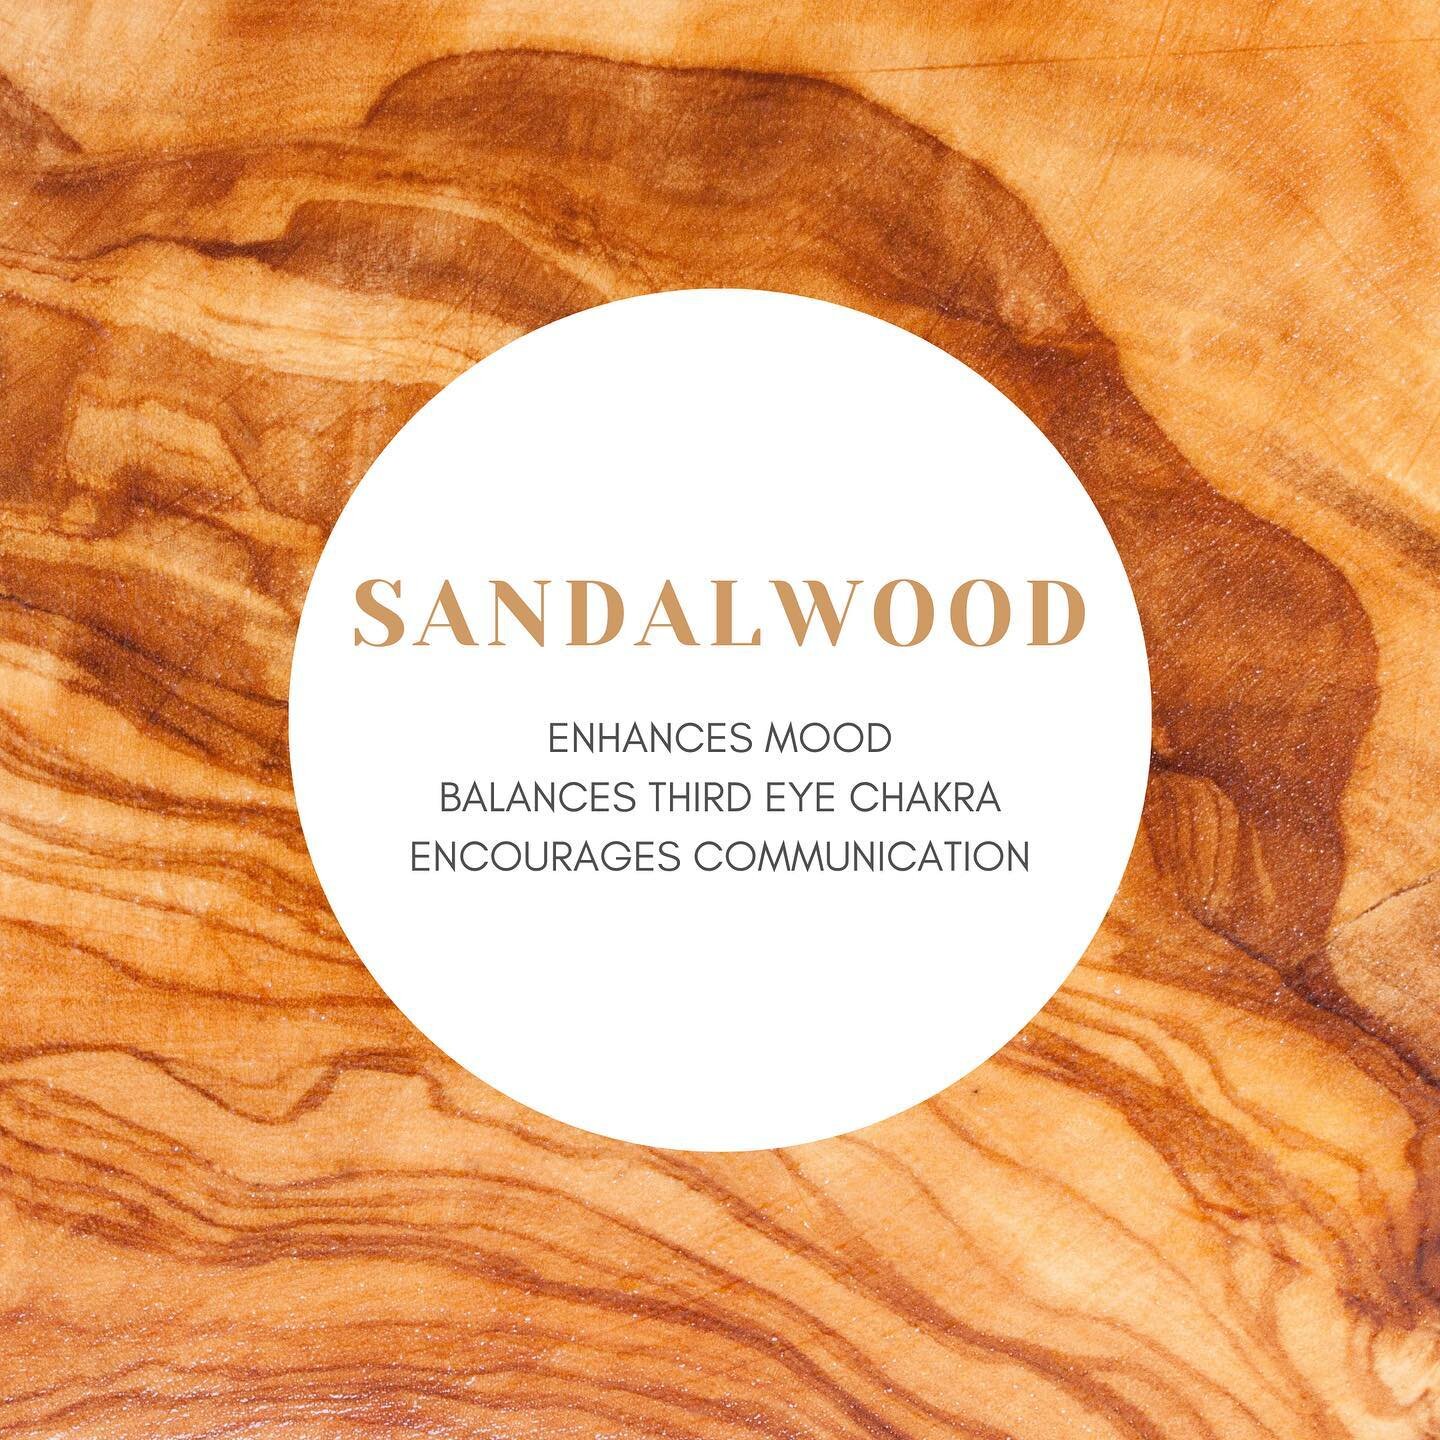 Thought it was the surprise? Ha, not yet! First, a lesson on the benefits of sandalwood&hellip;

When we think of wellness, we think of all things that enhance the mind, body and soul💫Fragrance is a great way to set us into a desired mood. Sandalwoo